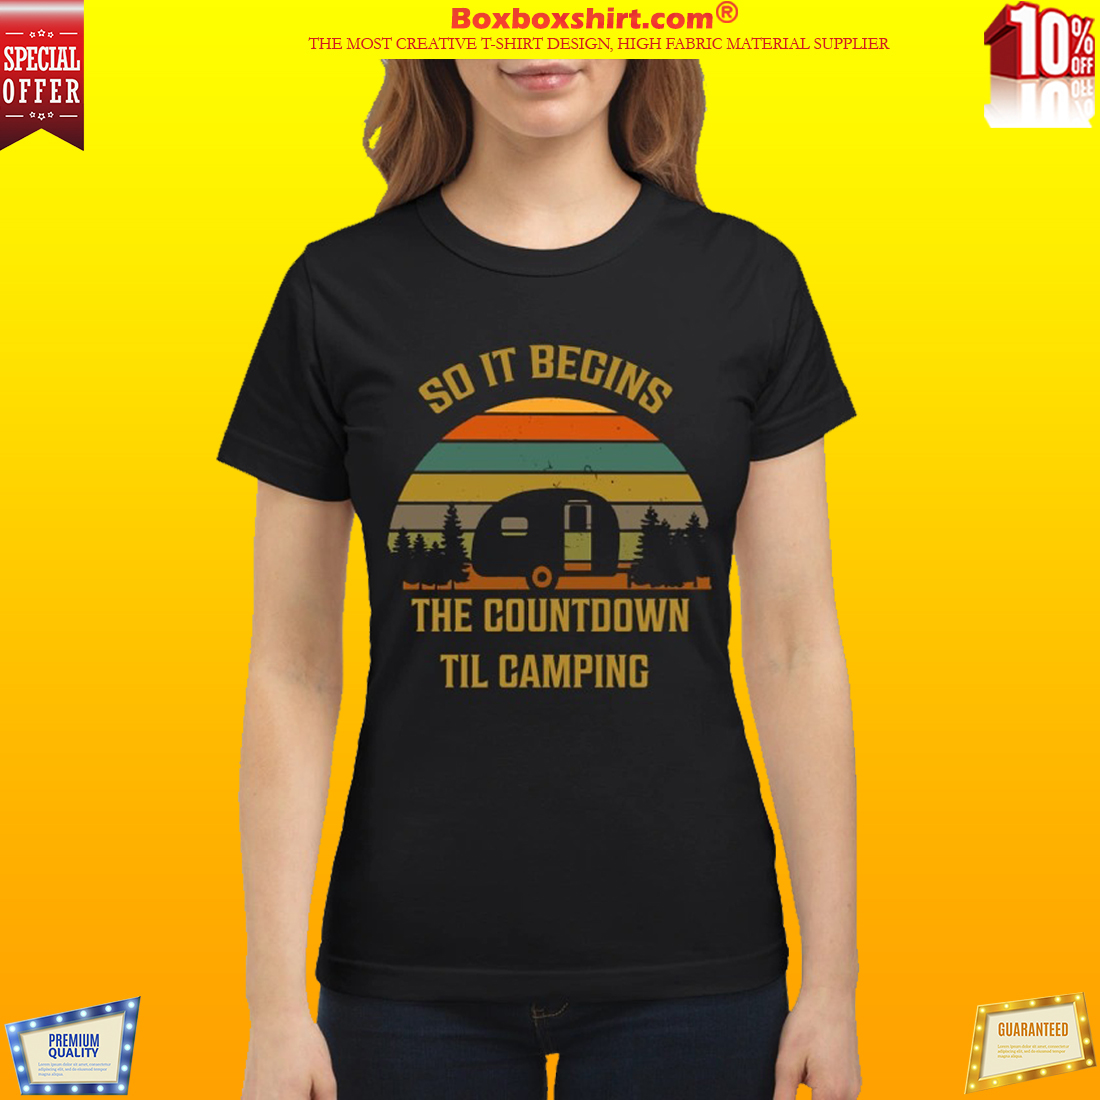 So it begins the countdown til camping classic shirt